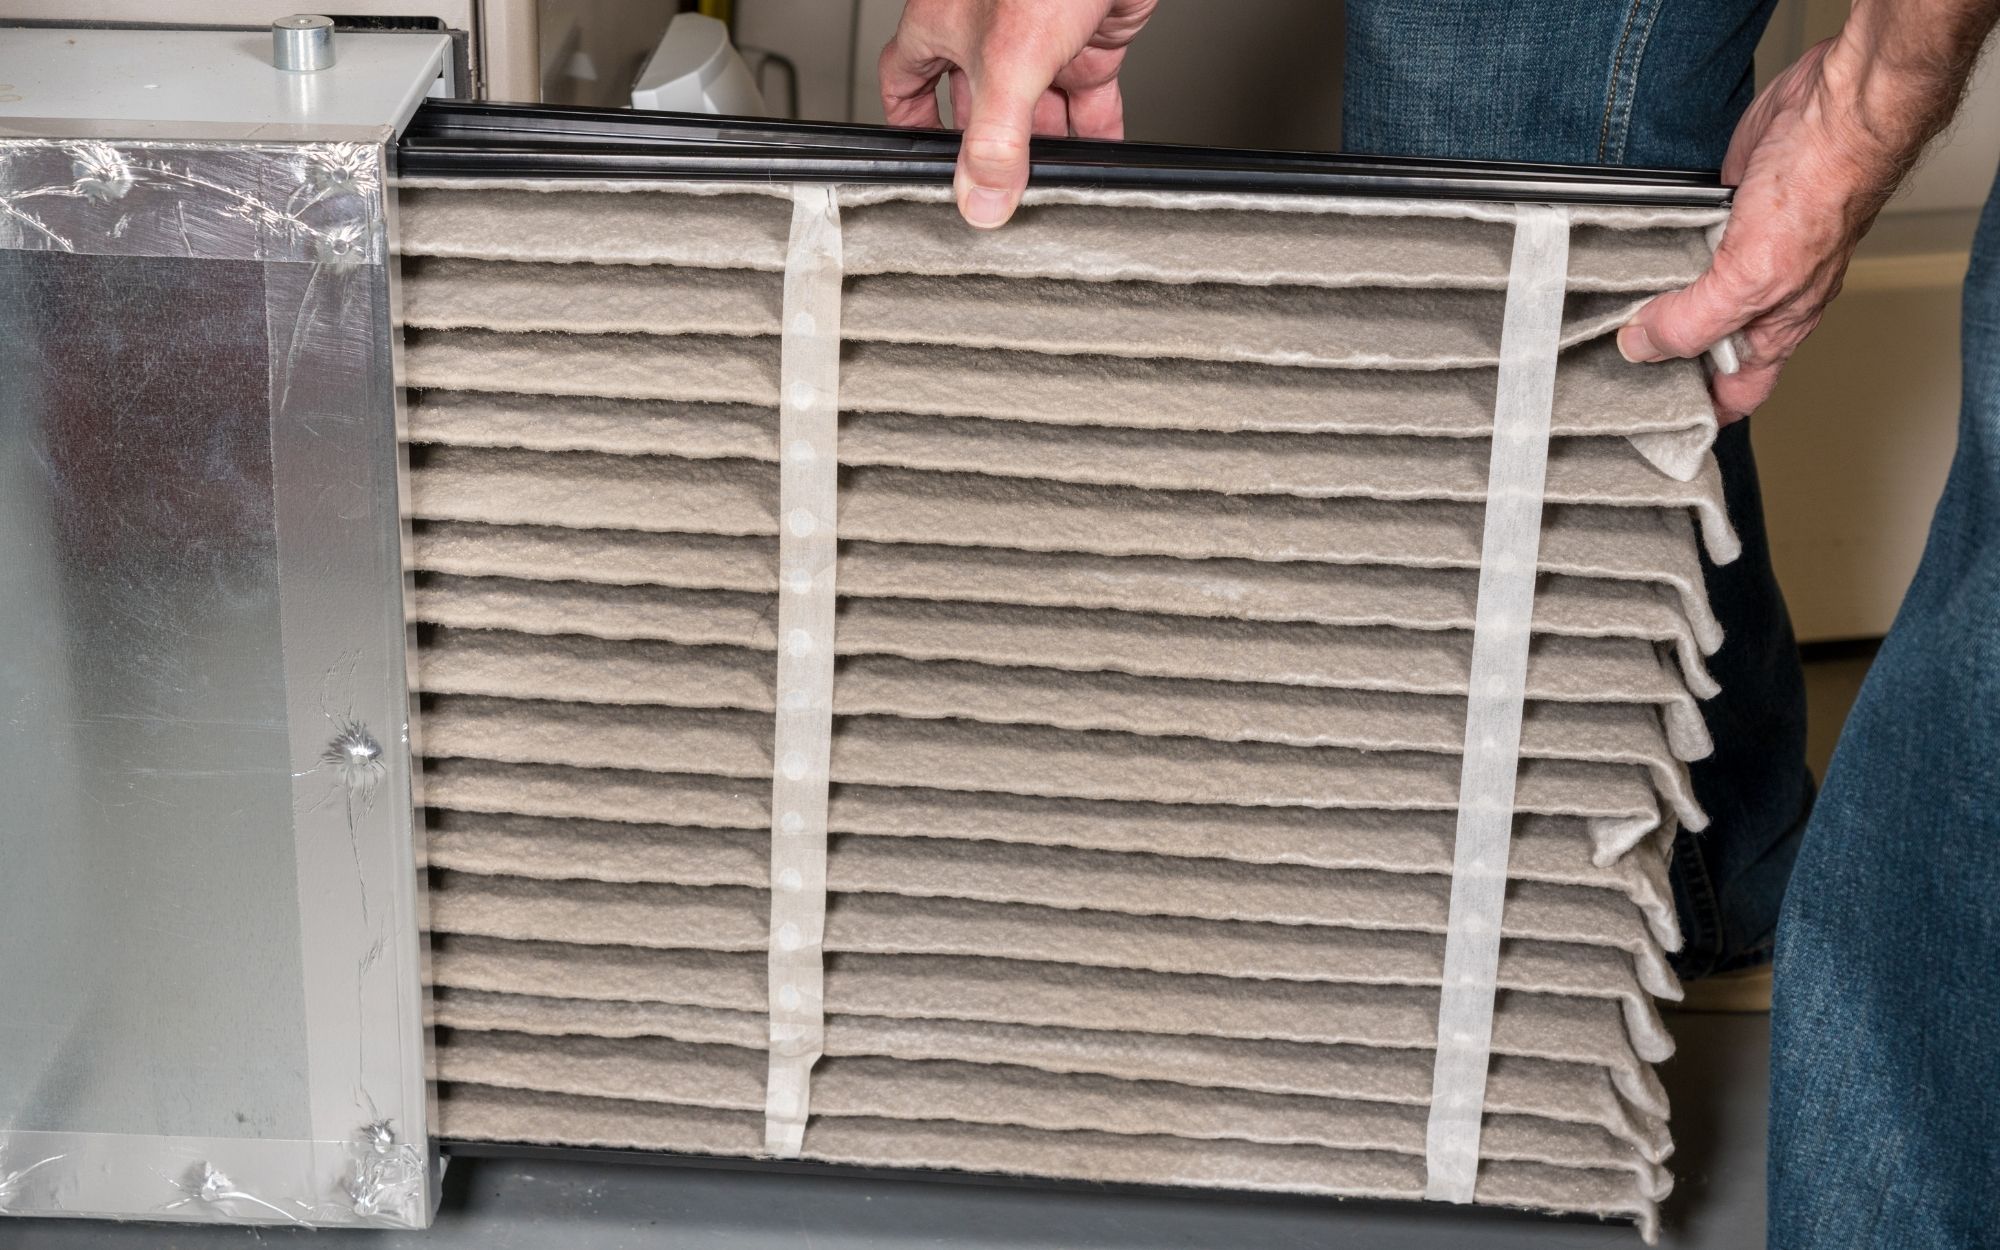 A dusty old musty air filter is being pulled out of the HVAC system